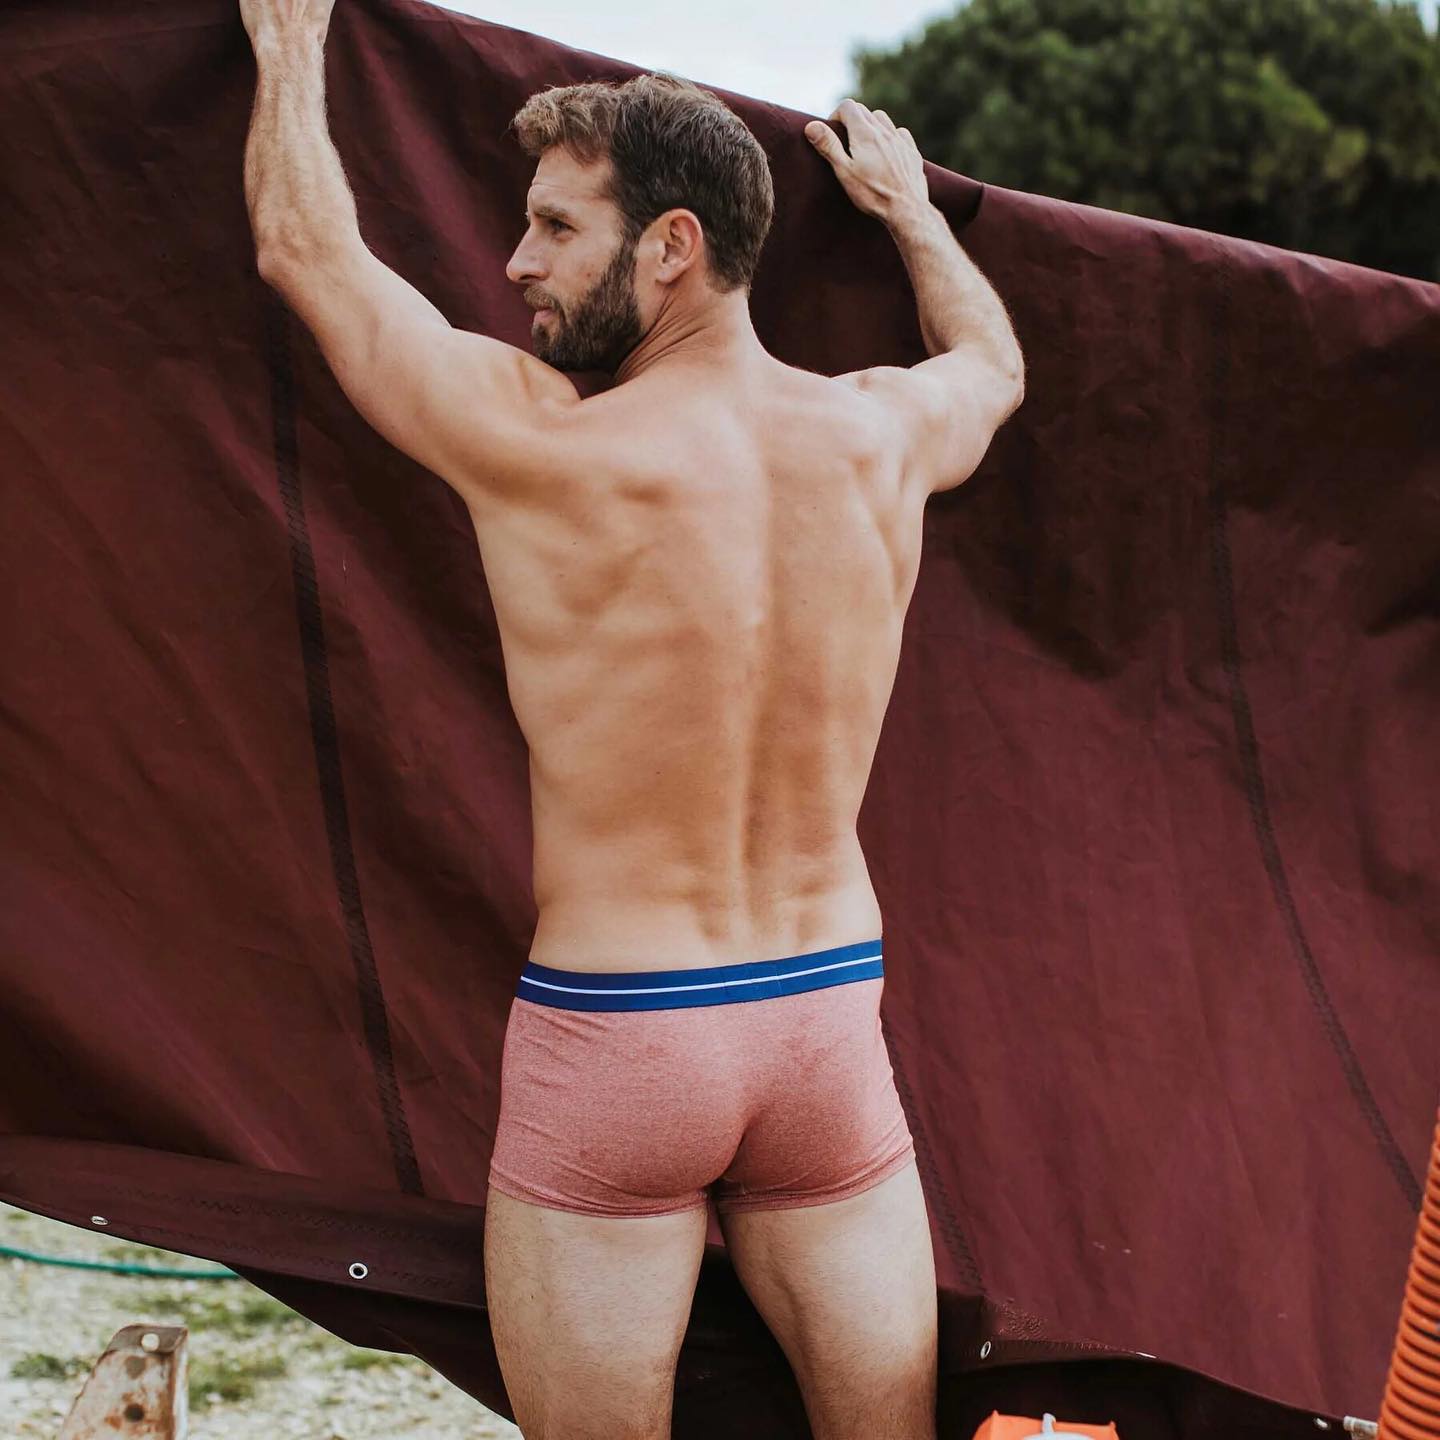 A unique mix of organic cotton with recycled polyester in a beautiful red melange fabric. Discover the Brick Trunks of Bluebuck:
_____
https://menandunderwear.com/shop/underwear/bluebuck-brick-trunks
_____
#red #trunks #boxers #organic #seaqual #cotton #bluebuck #shopping #shop #christmas